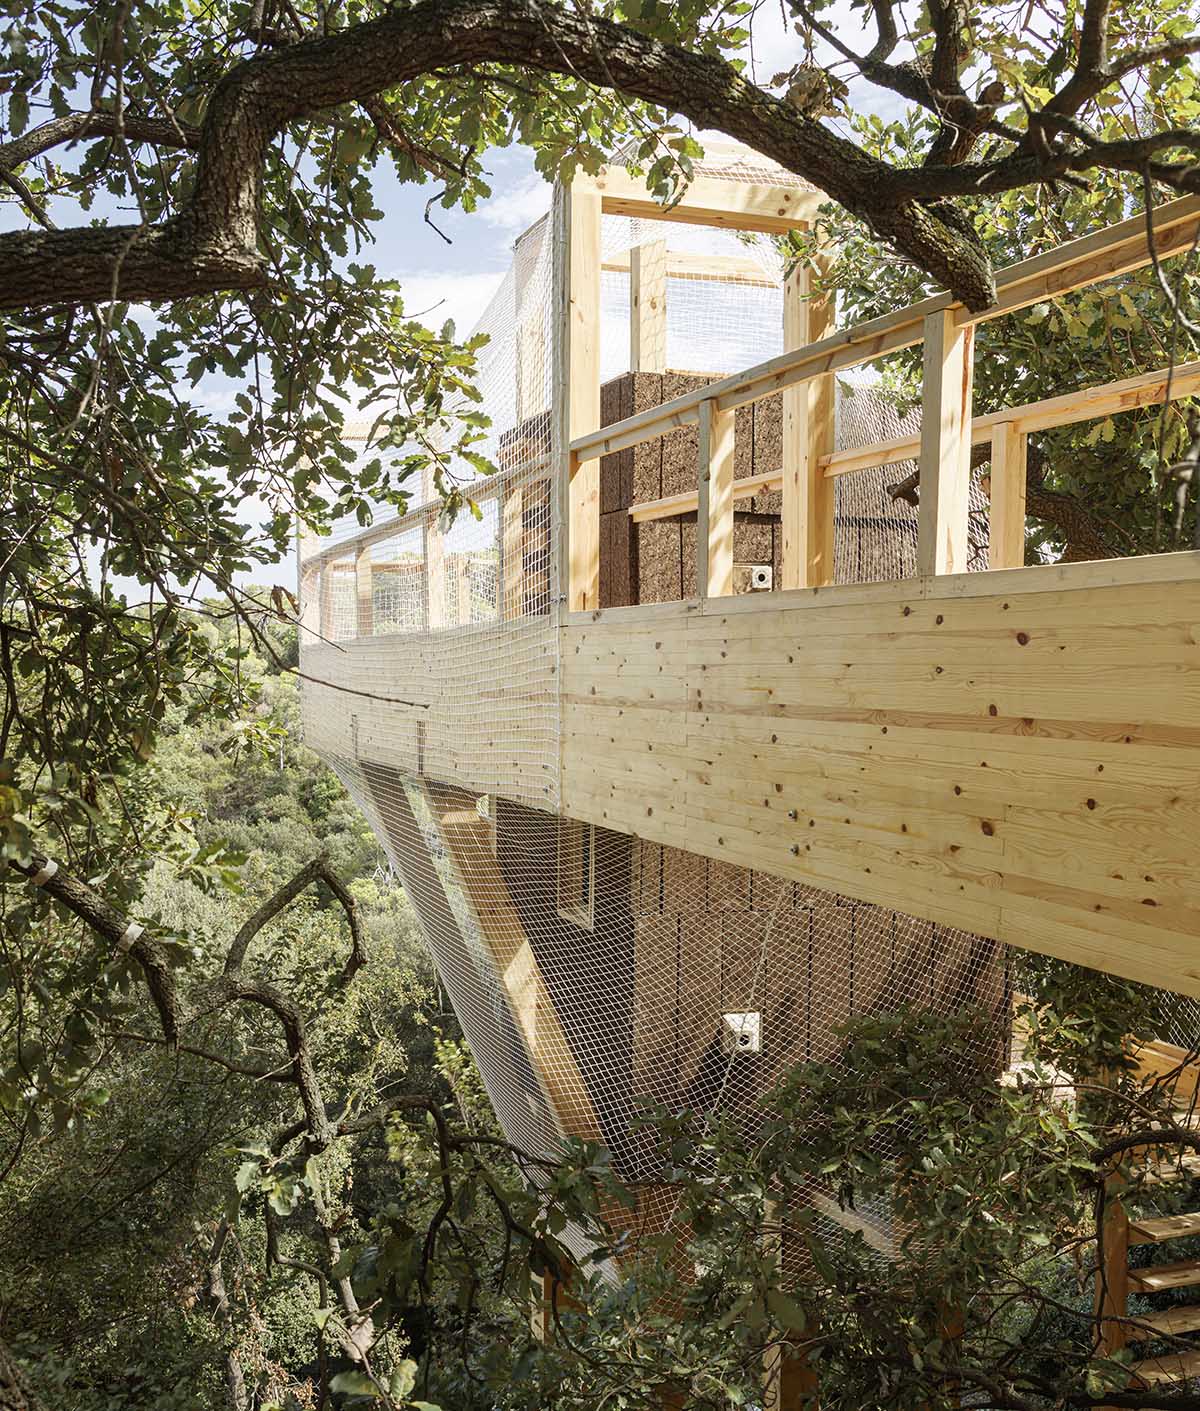 IAAC students built mass timber observatory based on 